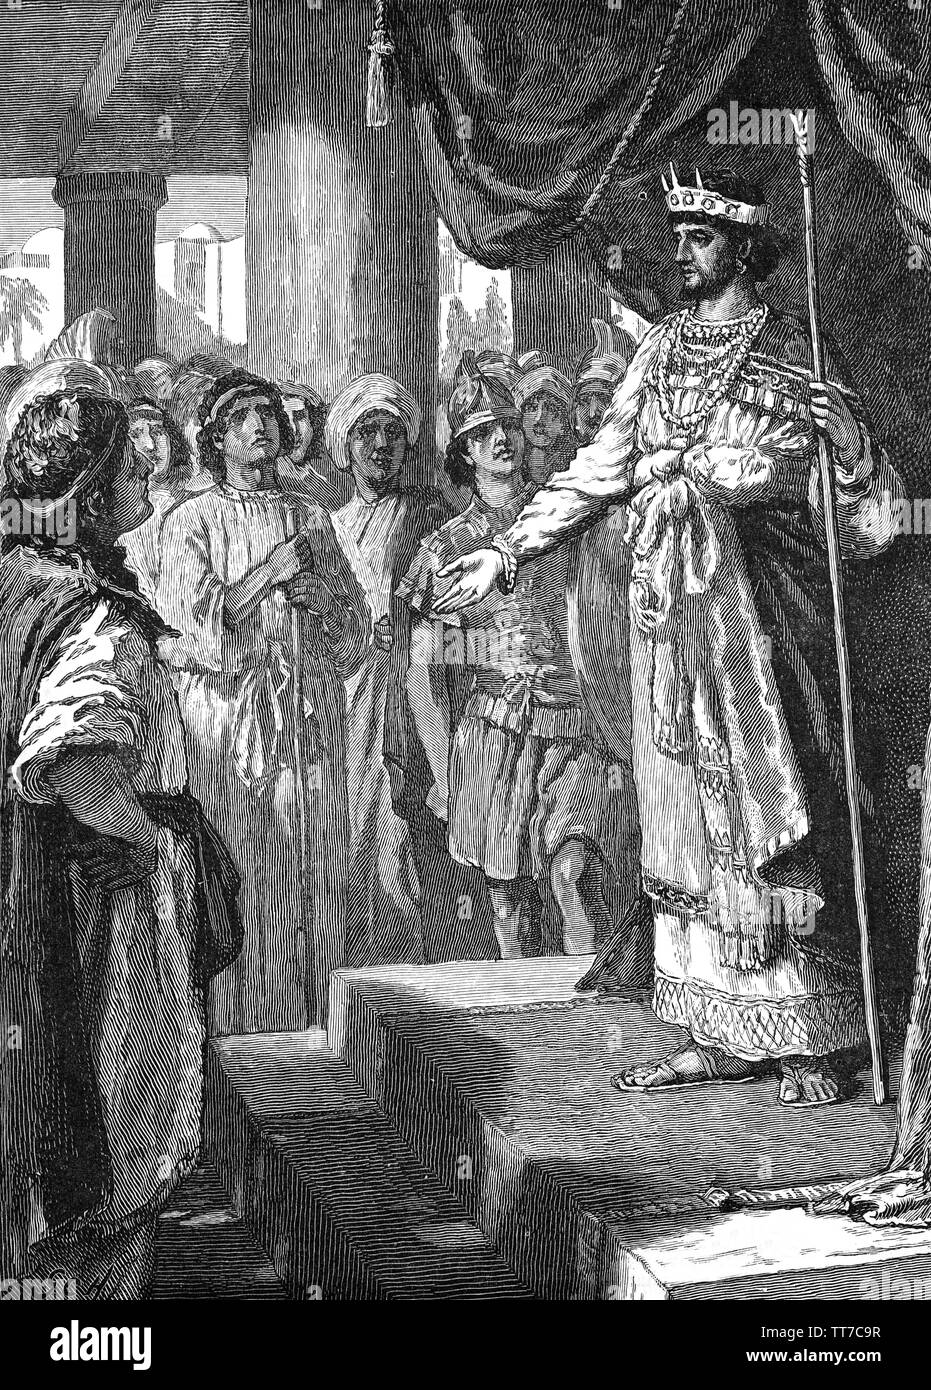 Rehoboam was the fourth king of Israel, son and successor to Solomon. Initially king of the United Monarchy of Israel, but after the ten northern tribes of Israel rebelled in 932/931 BC to form the independent Kingdom of Israel (Samaria), under the rule of Jeroboam, Rehoboam remained as king only of the Kingdom of Judah, or southern kingdom. The new king sought the advice from the young men he had grown up with, who advised him to show no weakness to the people, and to tax them even more, which Rehoboam did. Stock Photo